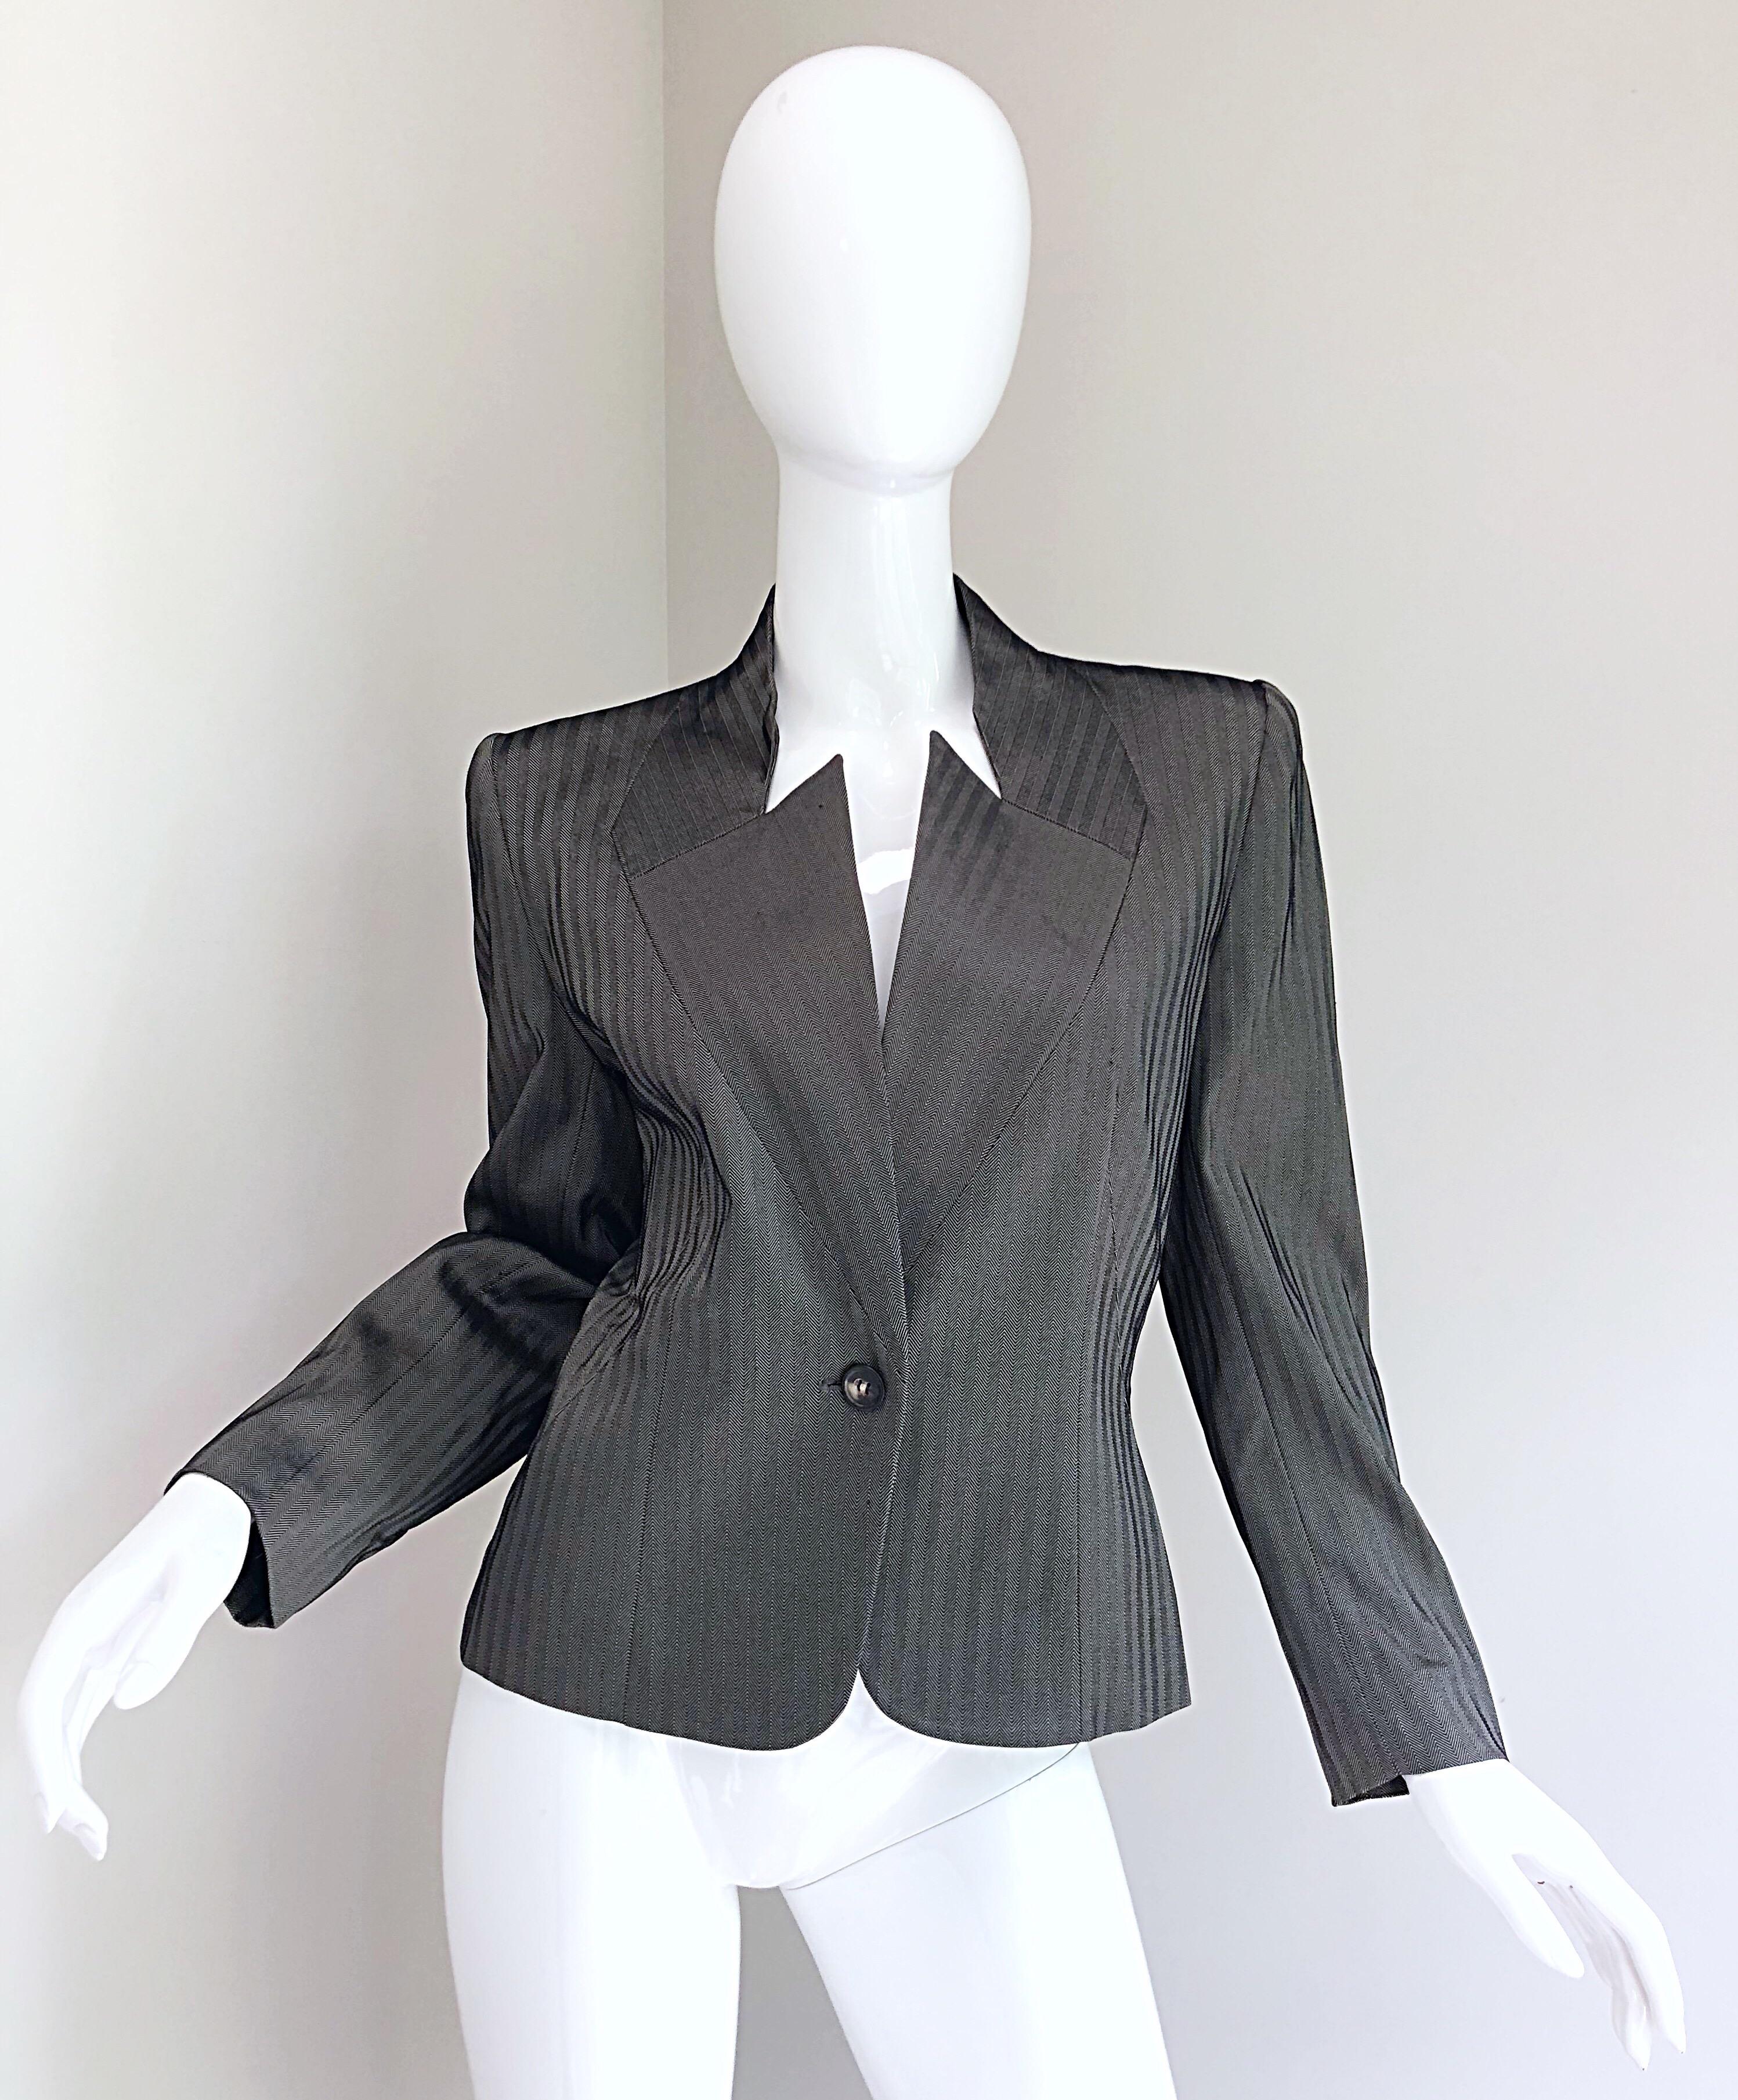 Amazing vintage 1990s GIVENCHY COUTURE by ALEXANDER MCQUEEN Avant Garde black and white herringbone silk blazer! Features an allover Herringbone print, with a unique bold futuristic neckline. Tailored fit looks amazing on! Single button closure.